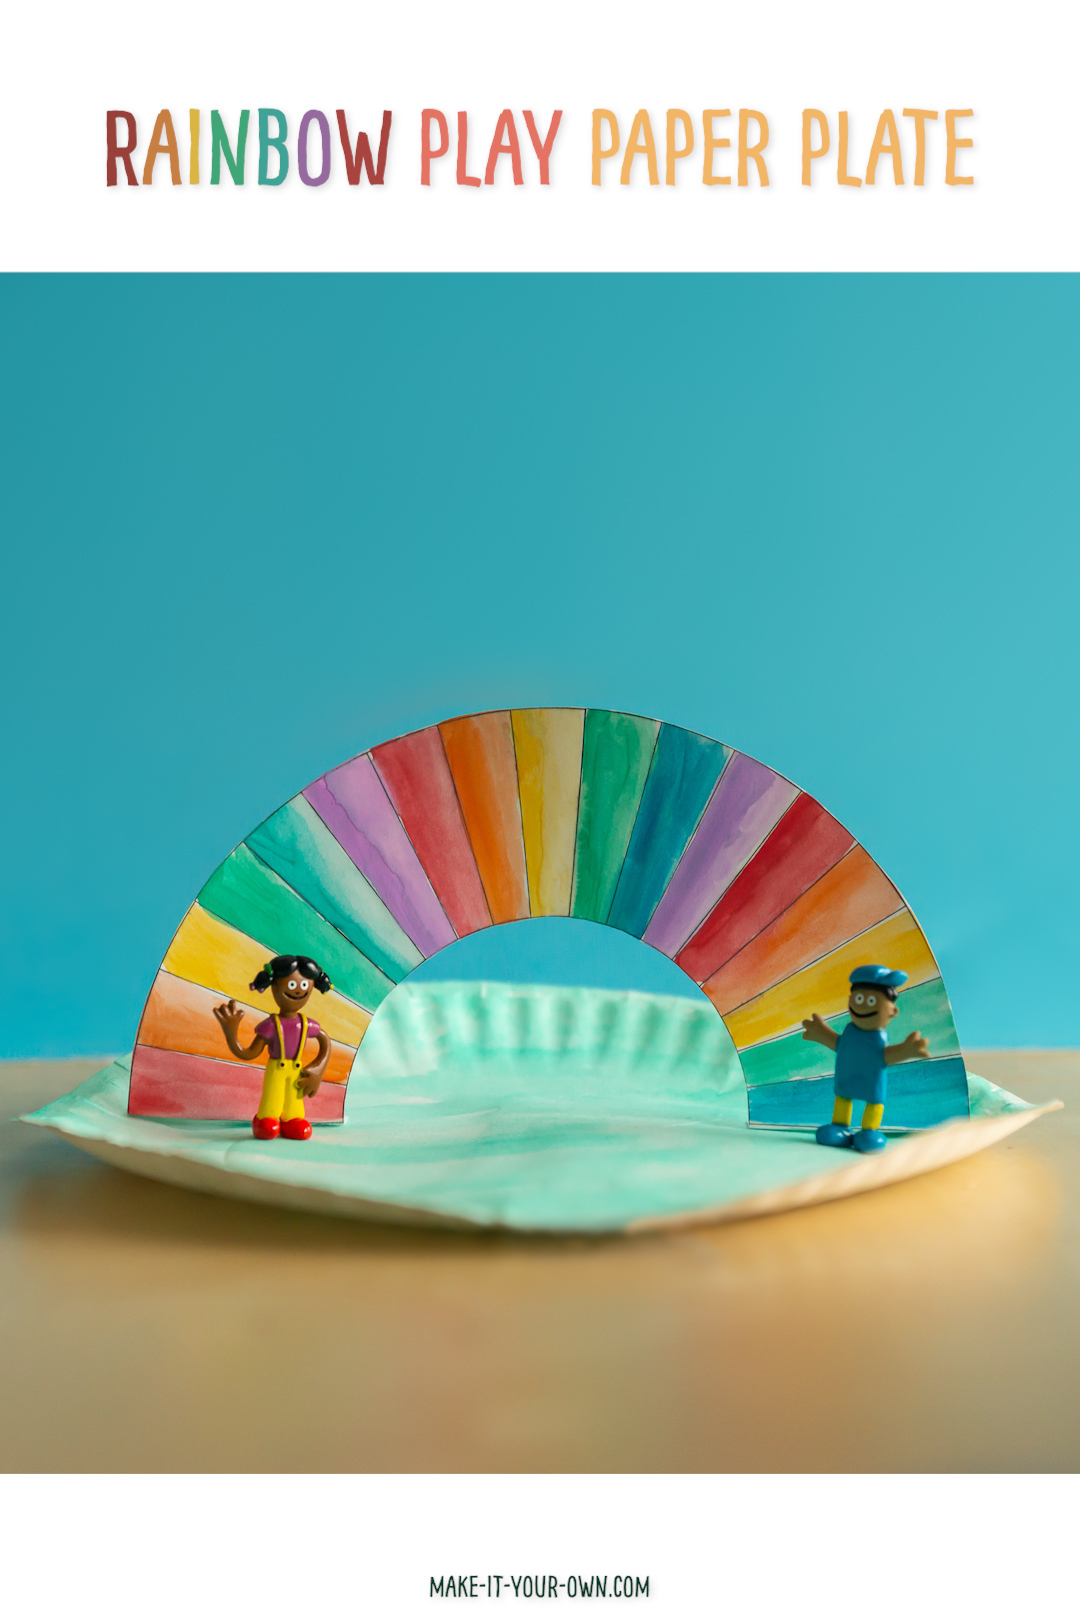 Rainbow Play Paper Plate:  On our website find this free printable to make your own rainbow small world play scene.  We have several different types of rainbows to colour or paint and some that are already filled in.  Glue your standing rainbow plate to make this St. Patrick's Day kids' craft that you can play with after! 